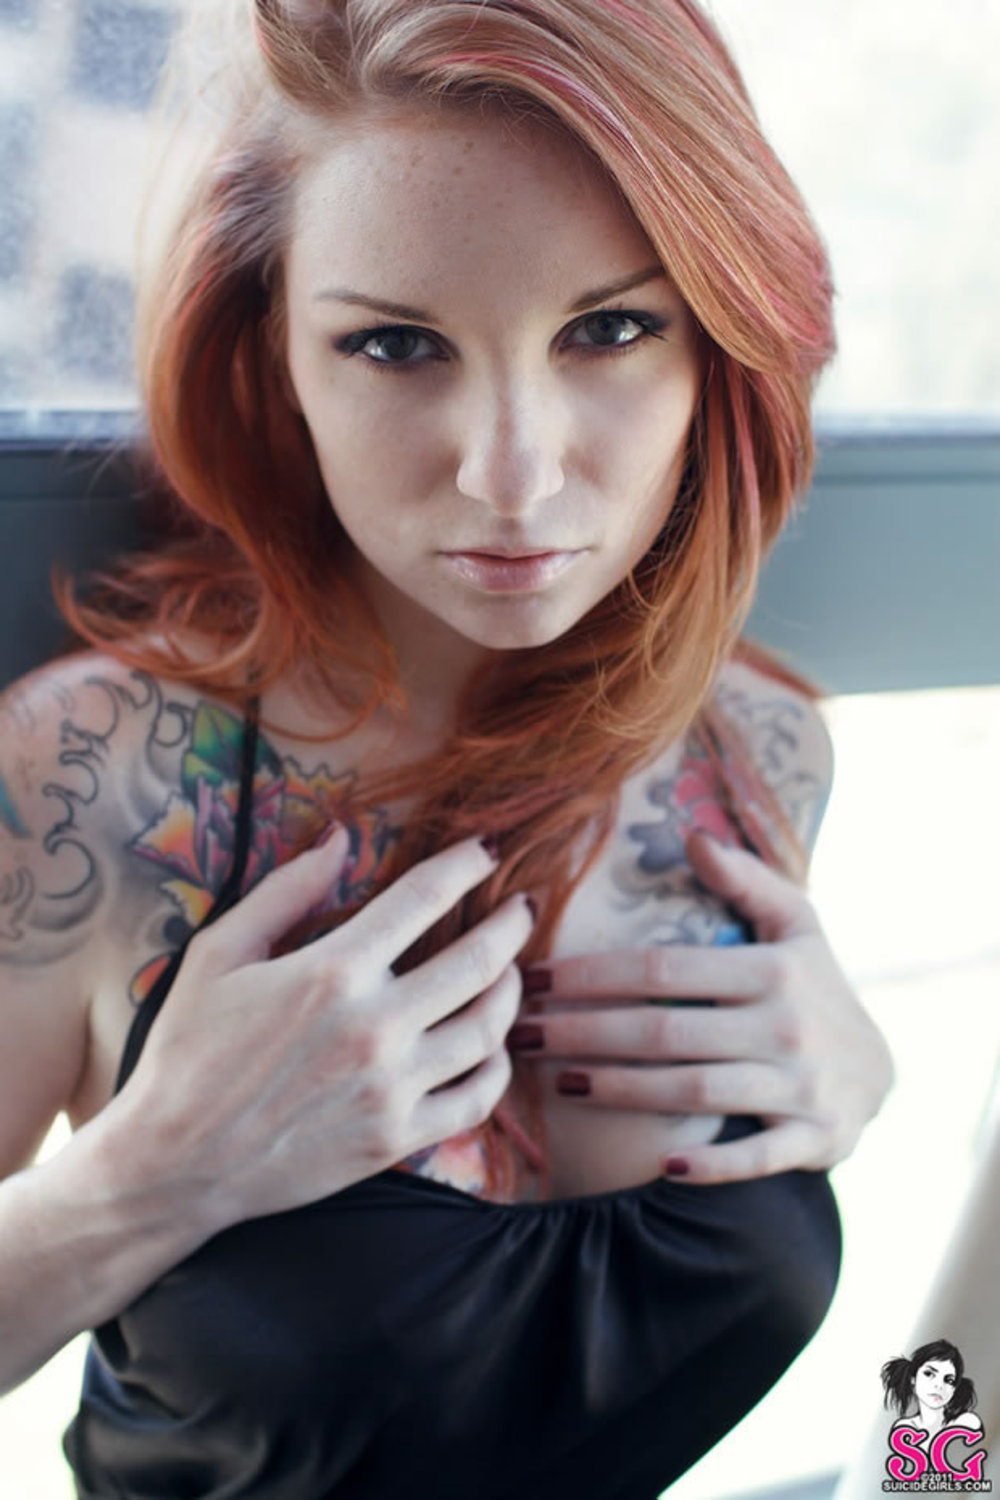 The Hottest Redhead 04